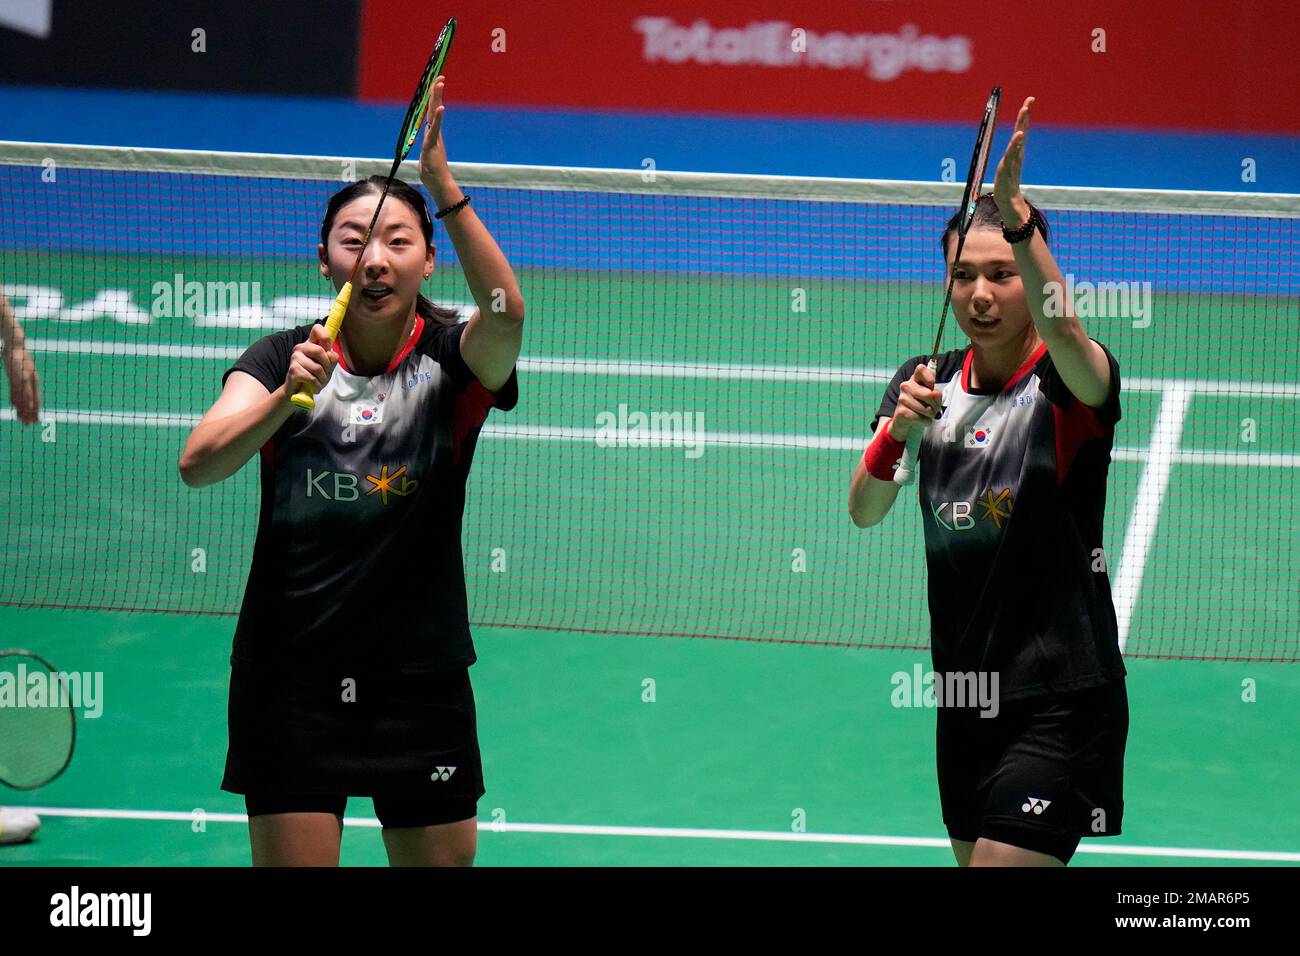 South Koreas Kong Hee-yong, left, and Kim So-yeong celebrate after winning over Japans Nami Matsuyama and Chiharu Shida during a badminton game of the womens doubles quarterfinal against in the BWF World